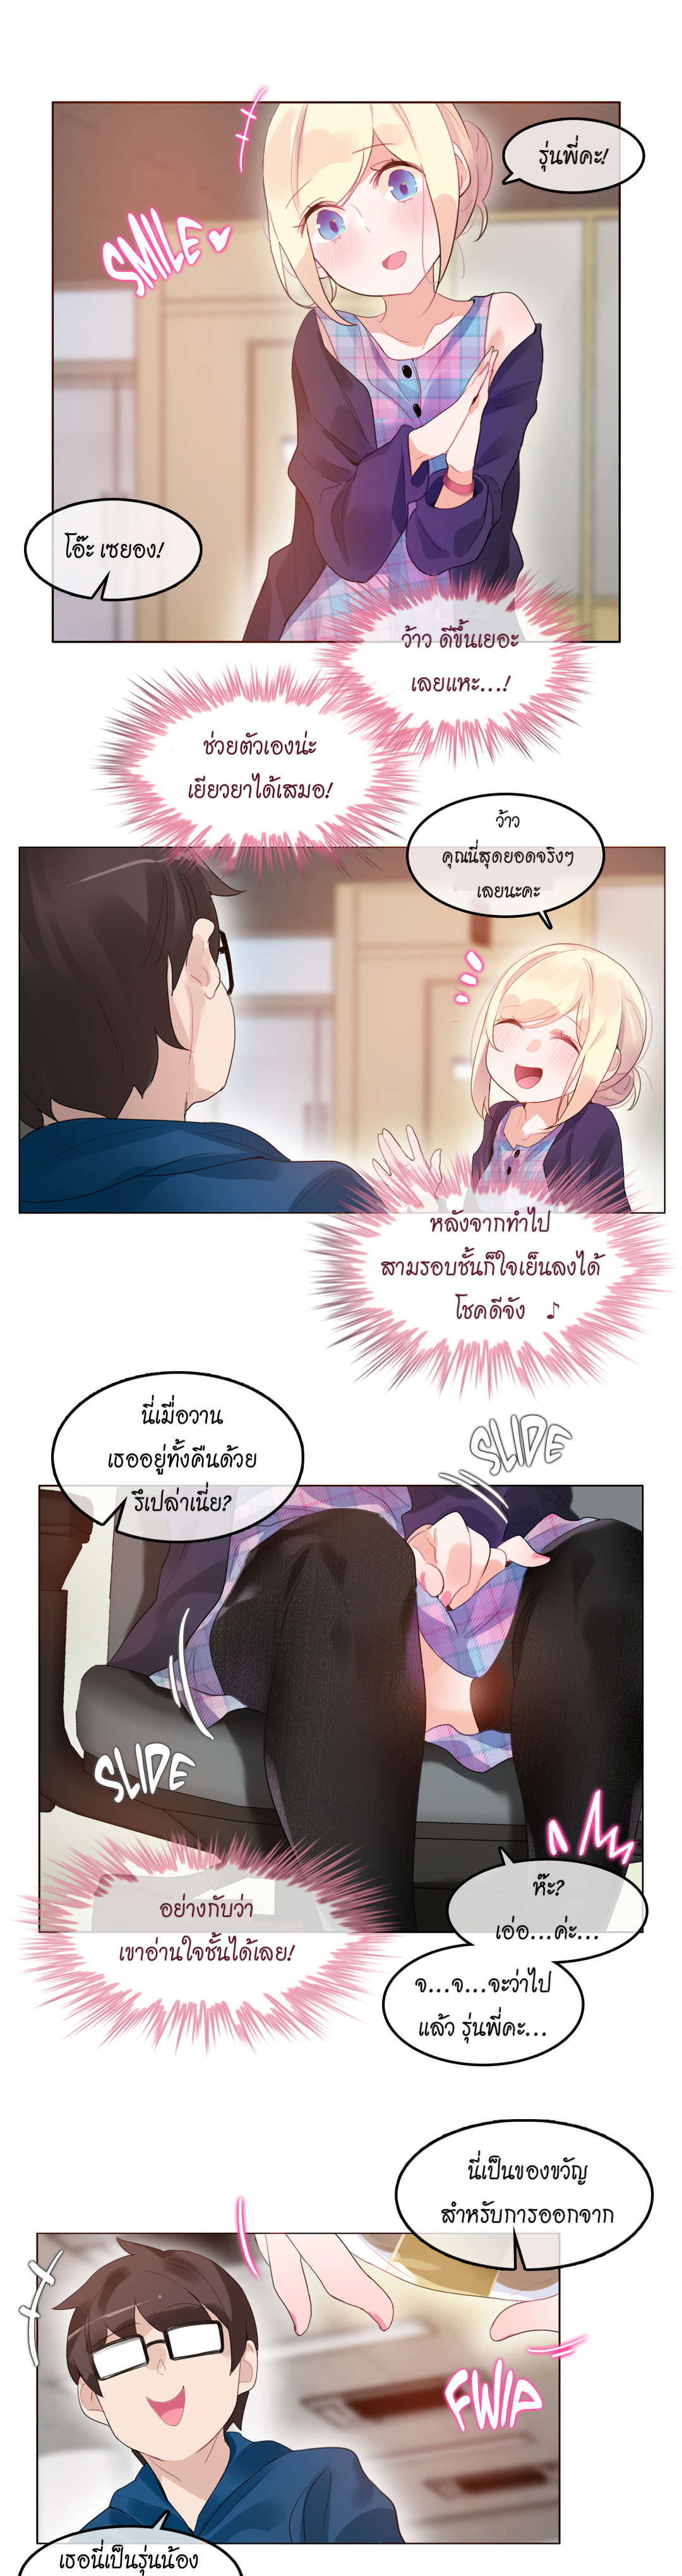 A Pervert’s Daily Life53 (8)